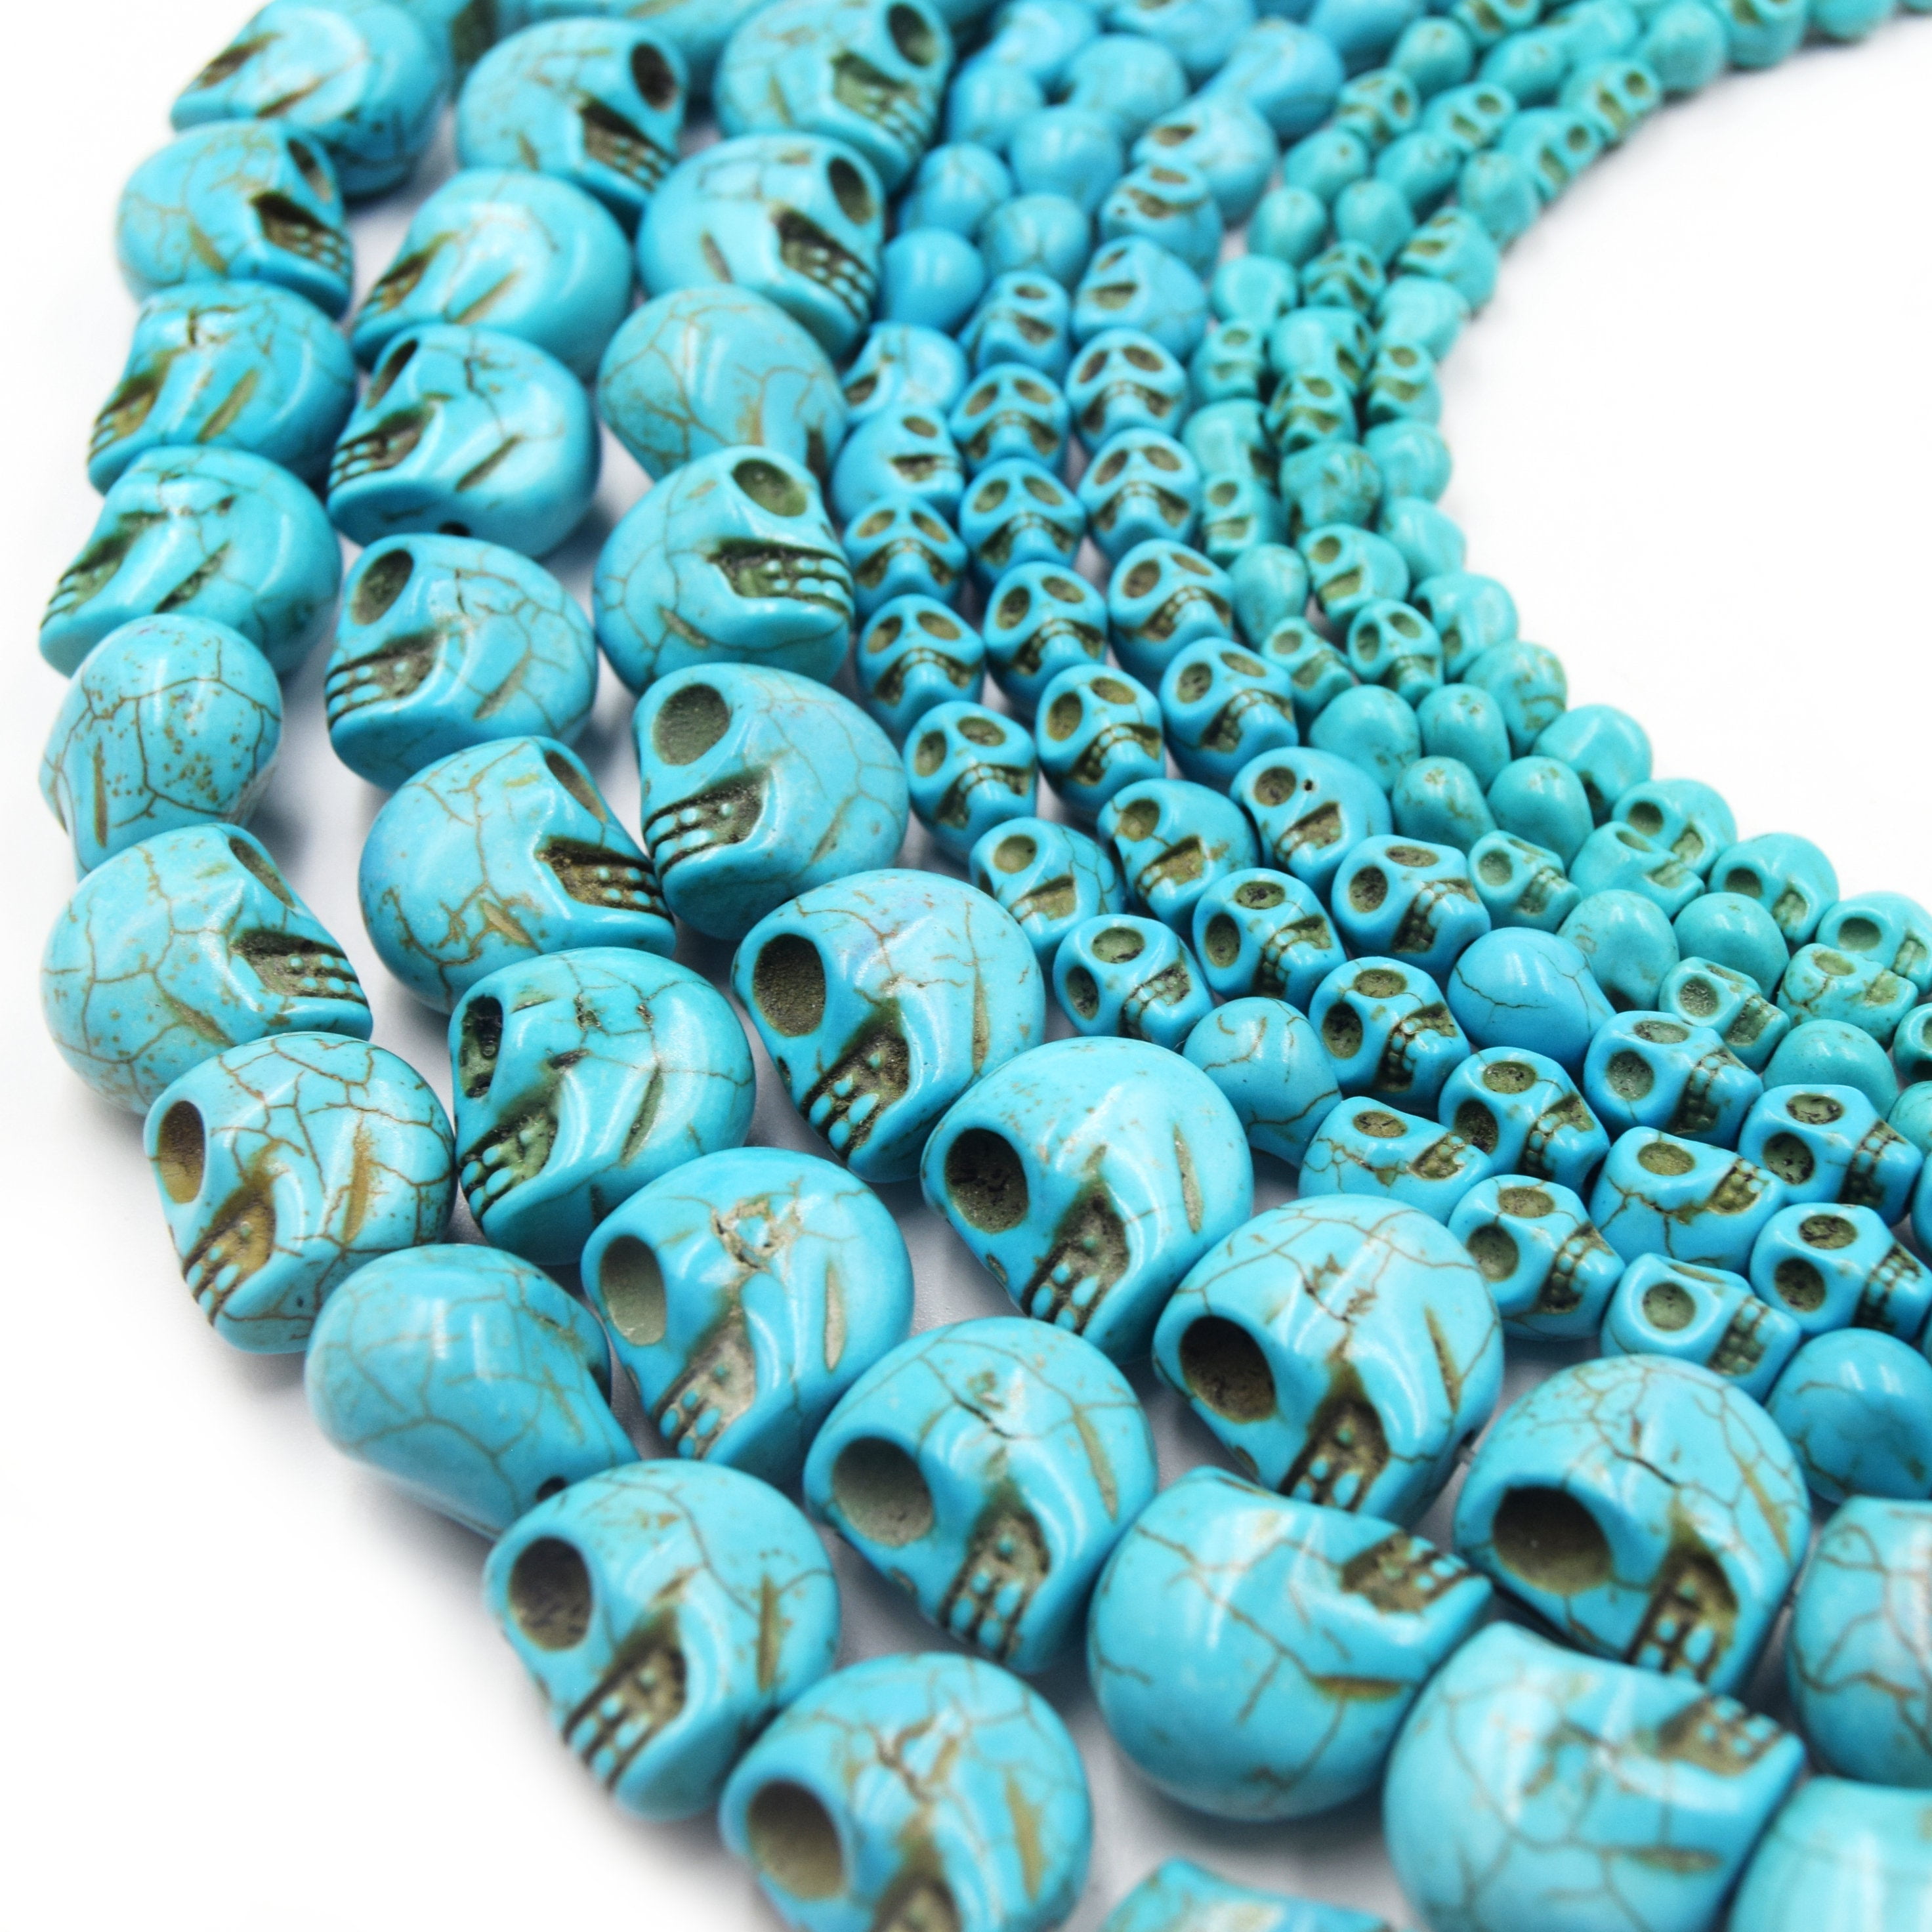 10mm Tiny Colorful Turquoise Skull Beads Halloween 20 